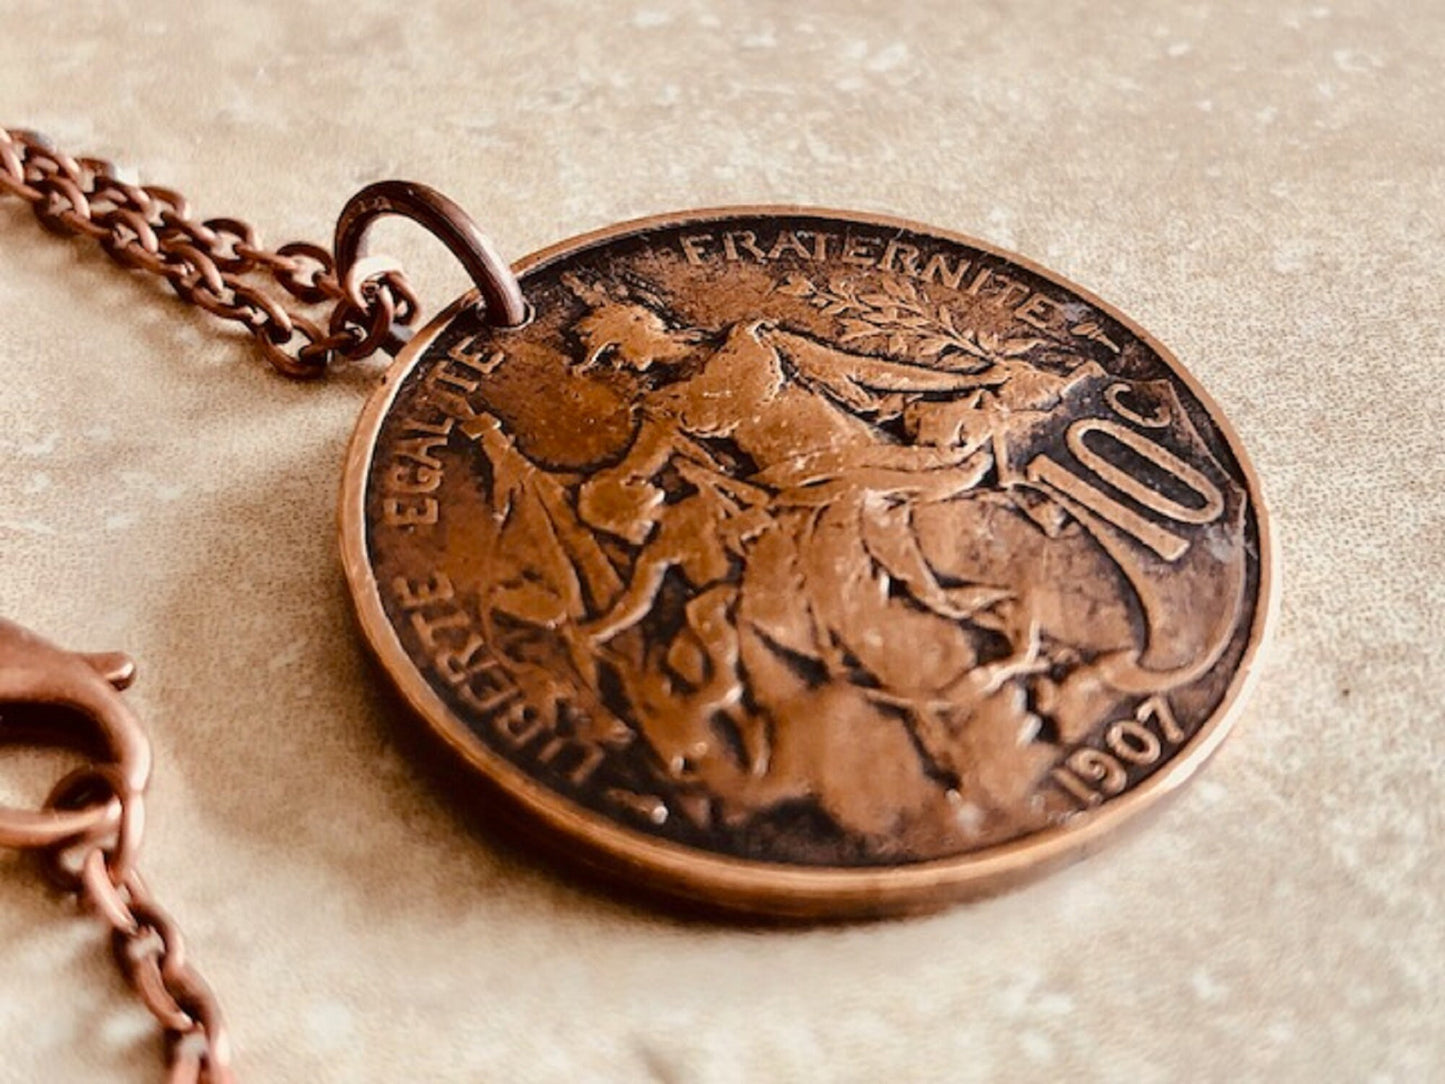 France Coin Necklace French Pendant 10 Centimes Liberty Equality Fraternity Personal Jewelry Gift Friend Charm Him Her World Coin Collector